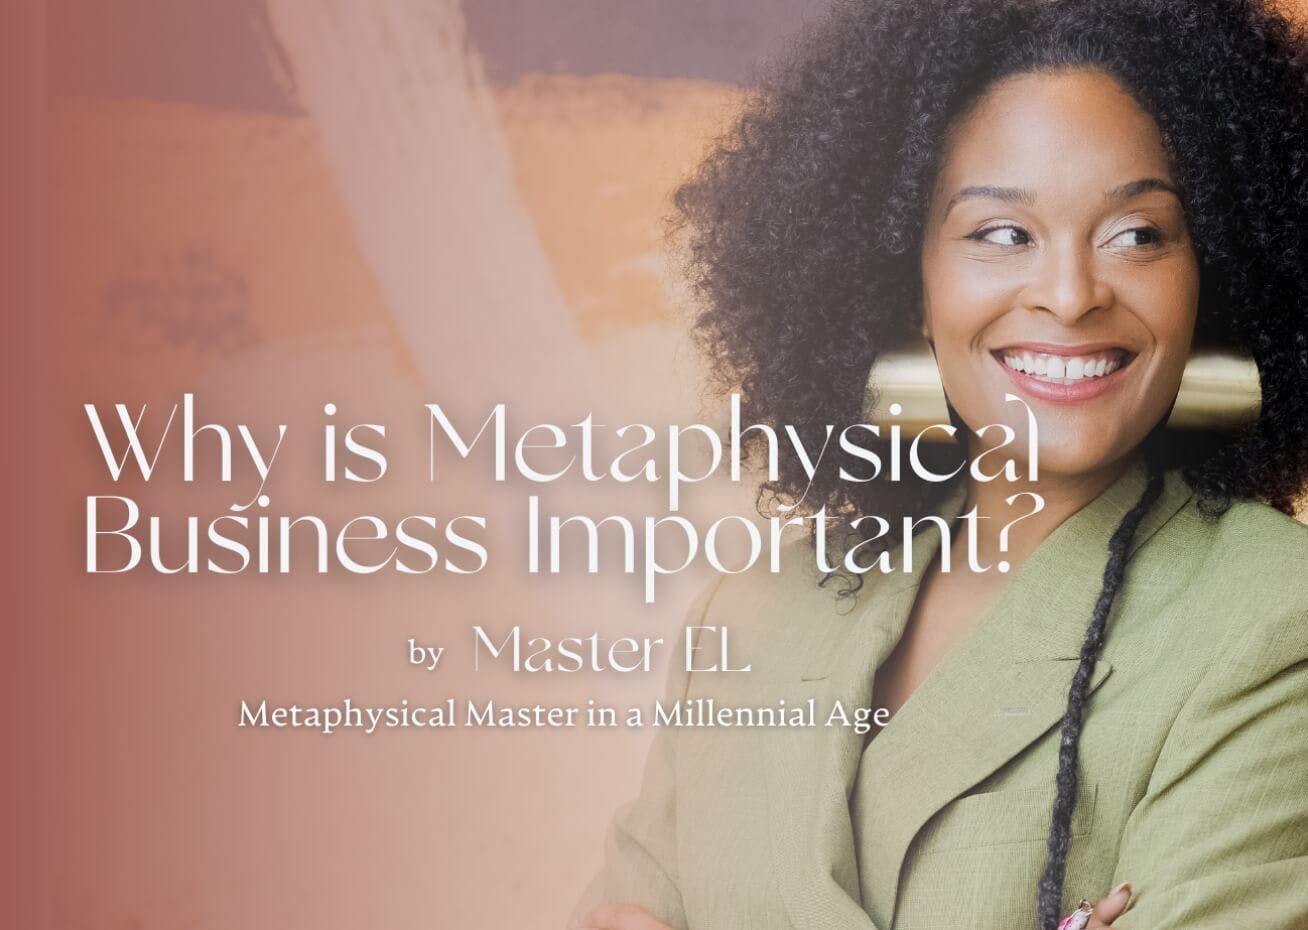 Erin Patten - Why is Metaphysical Business important?